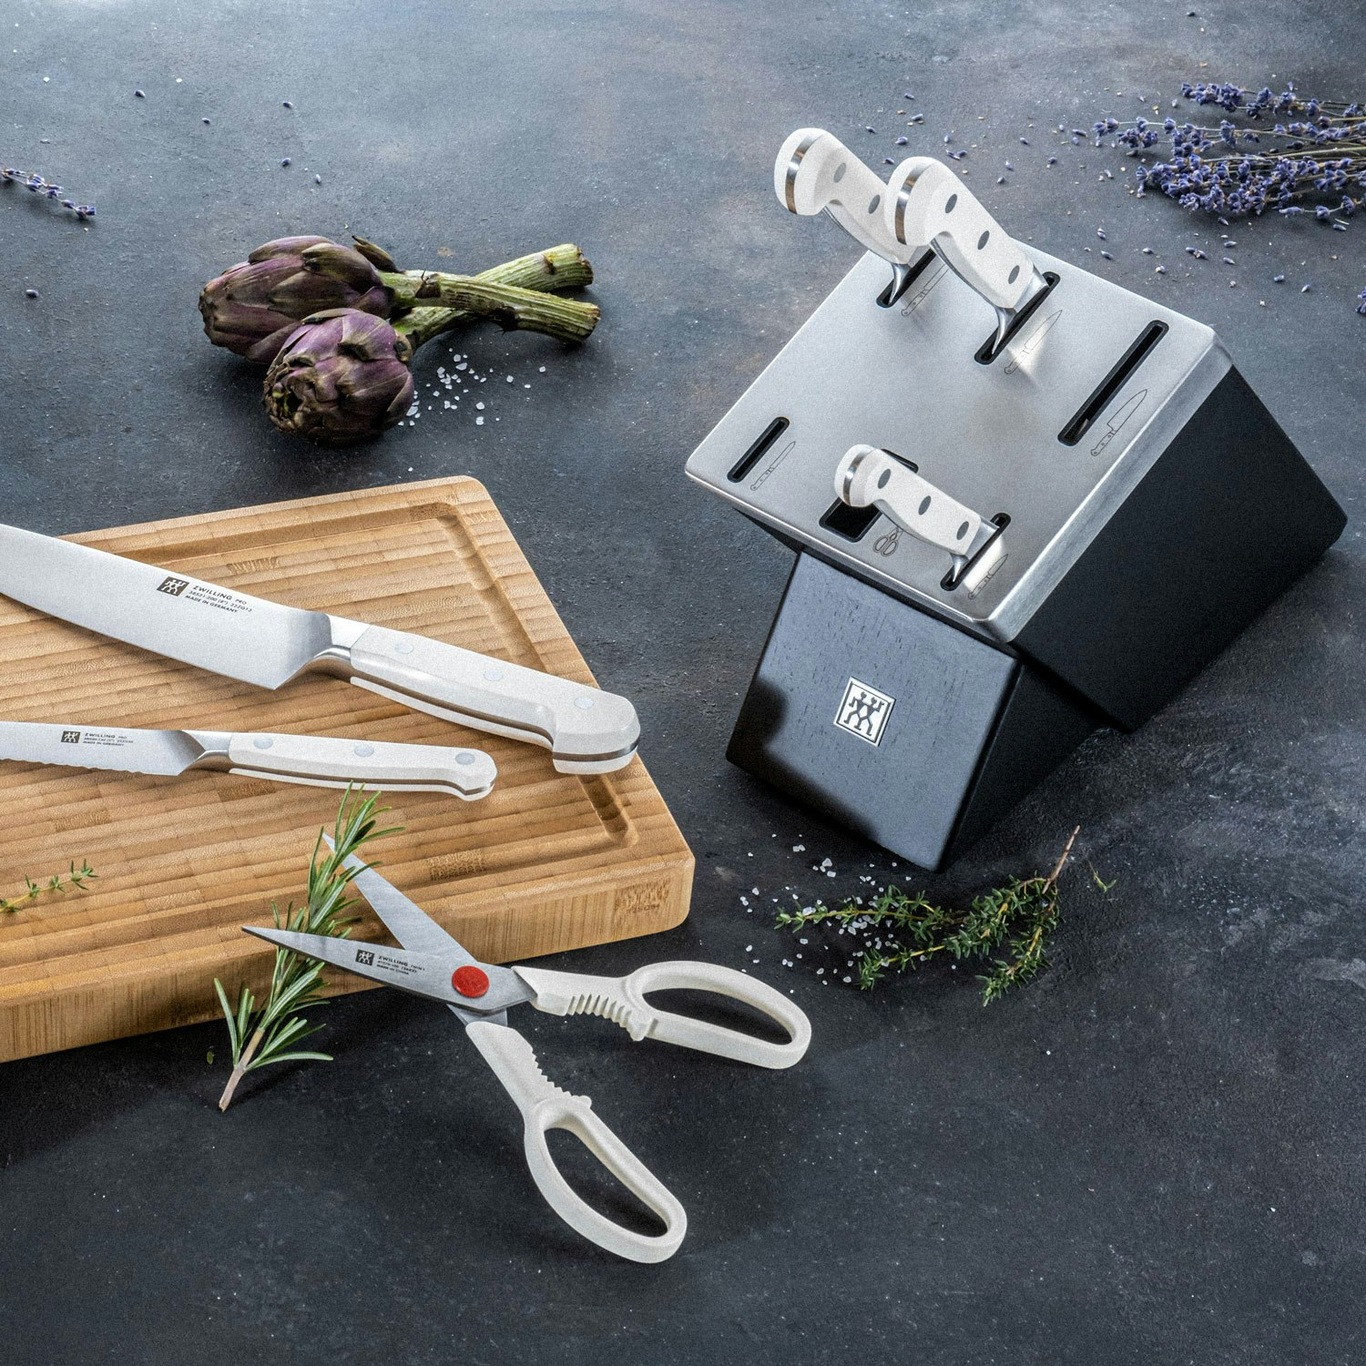 https://royaldesign.com/image/2/zwilling-pro-le-blanc-knife-block-with-knives-7-pieces-1?w=800&quality=80